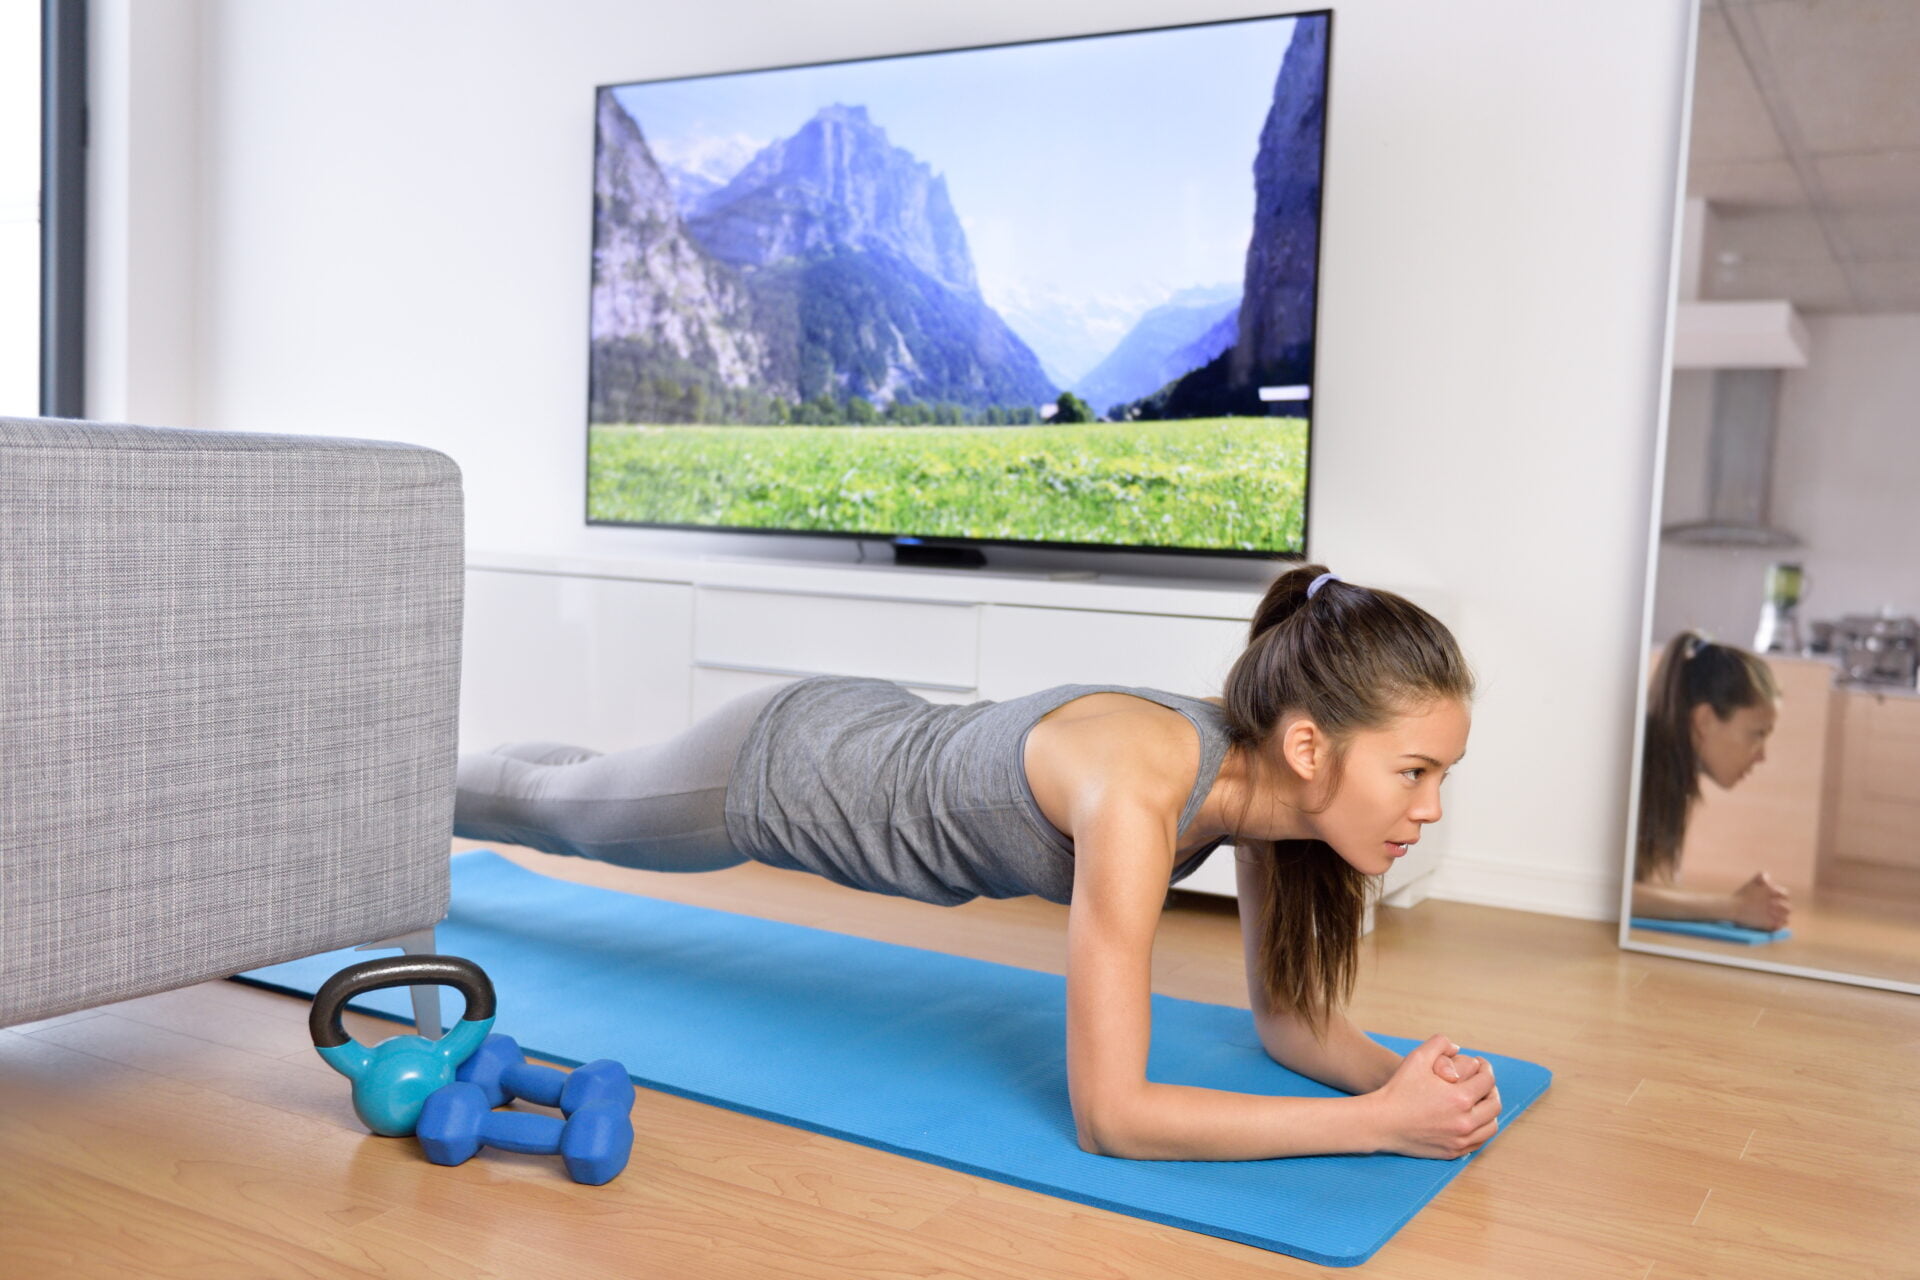 Living room fitness workout - girl doing plank exercises to exercise core at home. Young Asian woman training muscles in front of the TV as part of a healthy lifestyle without going to the gym